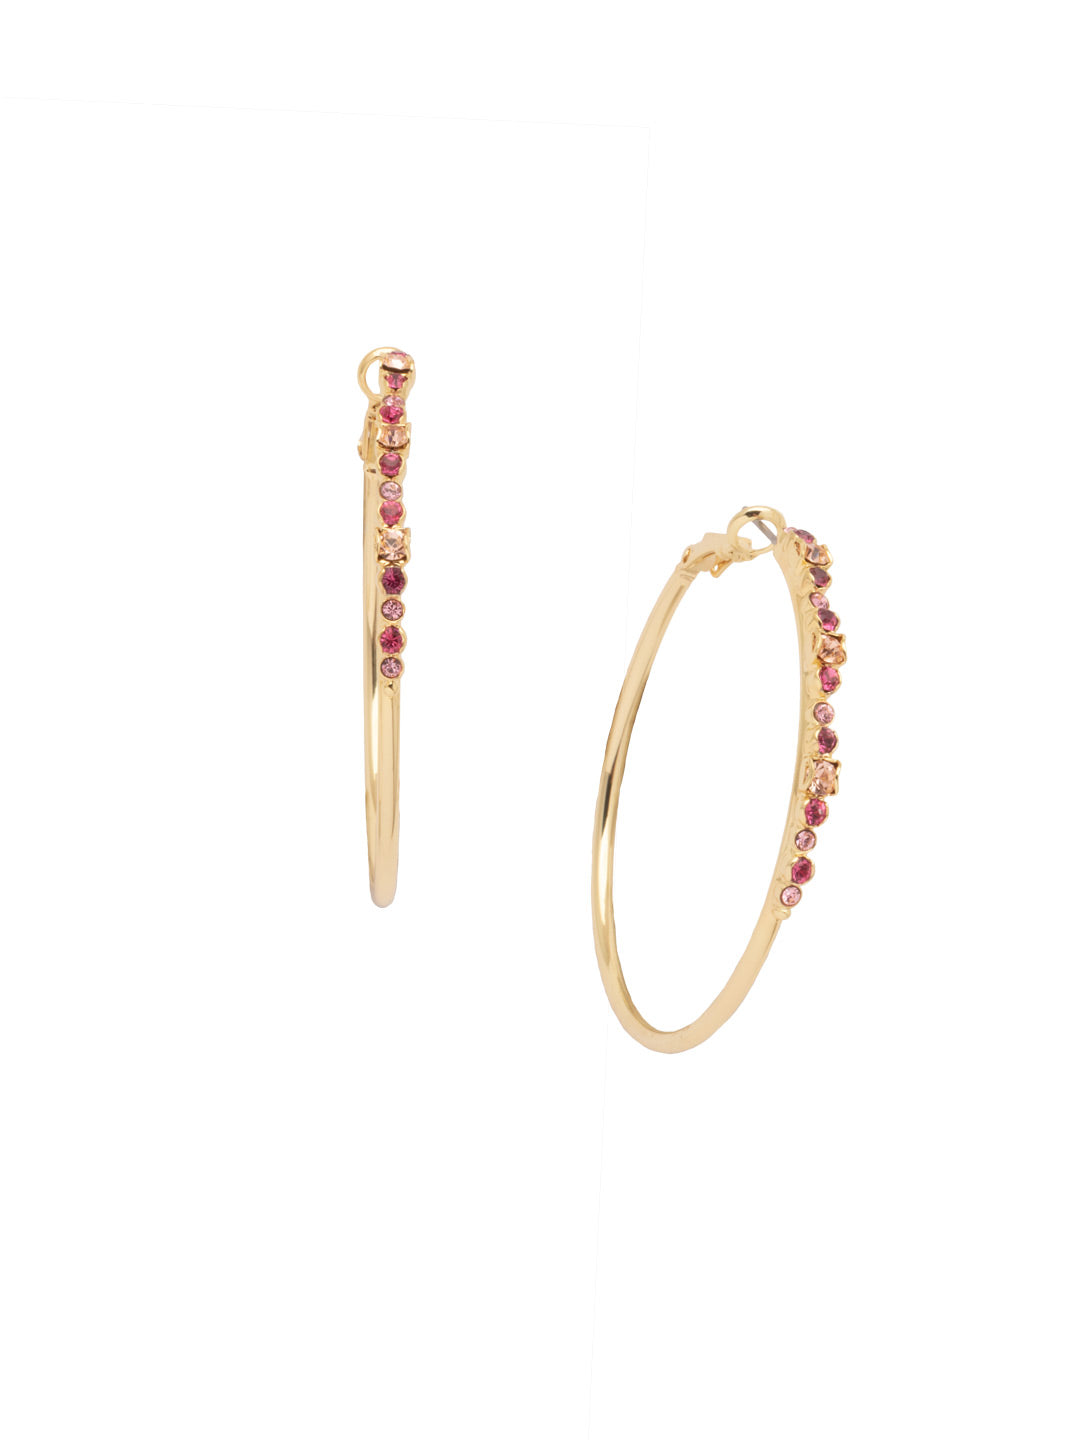 Hoopla Hoop Earrings - EDN79BGFSK - <p>Worth making a fuss over, these crystal hoop earrings make a statement without feeling heavy and that's what the hoopla is about! From Sorrelli's First Kiss collection in our Bright Gold-tone finish.</p>